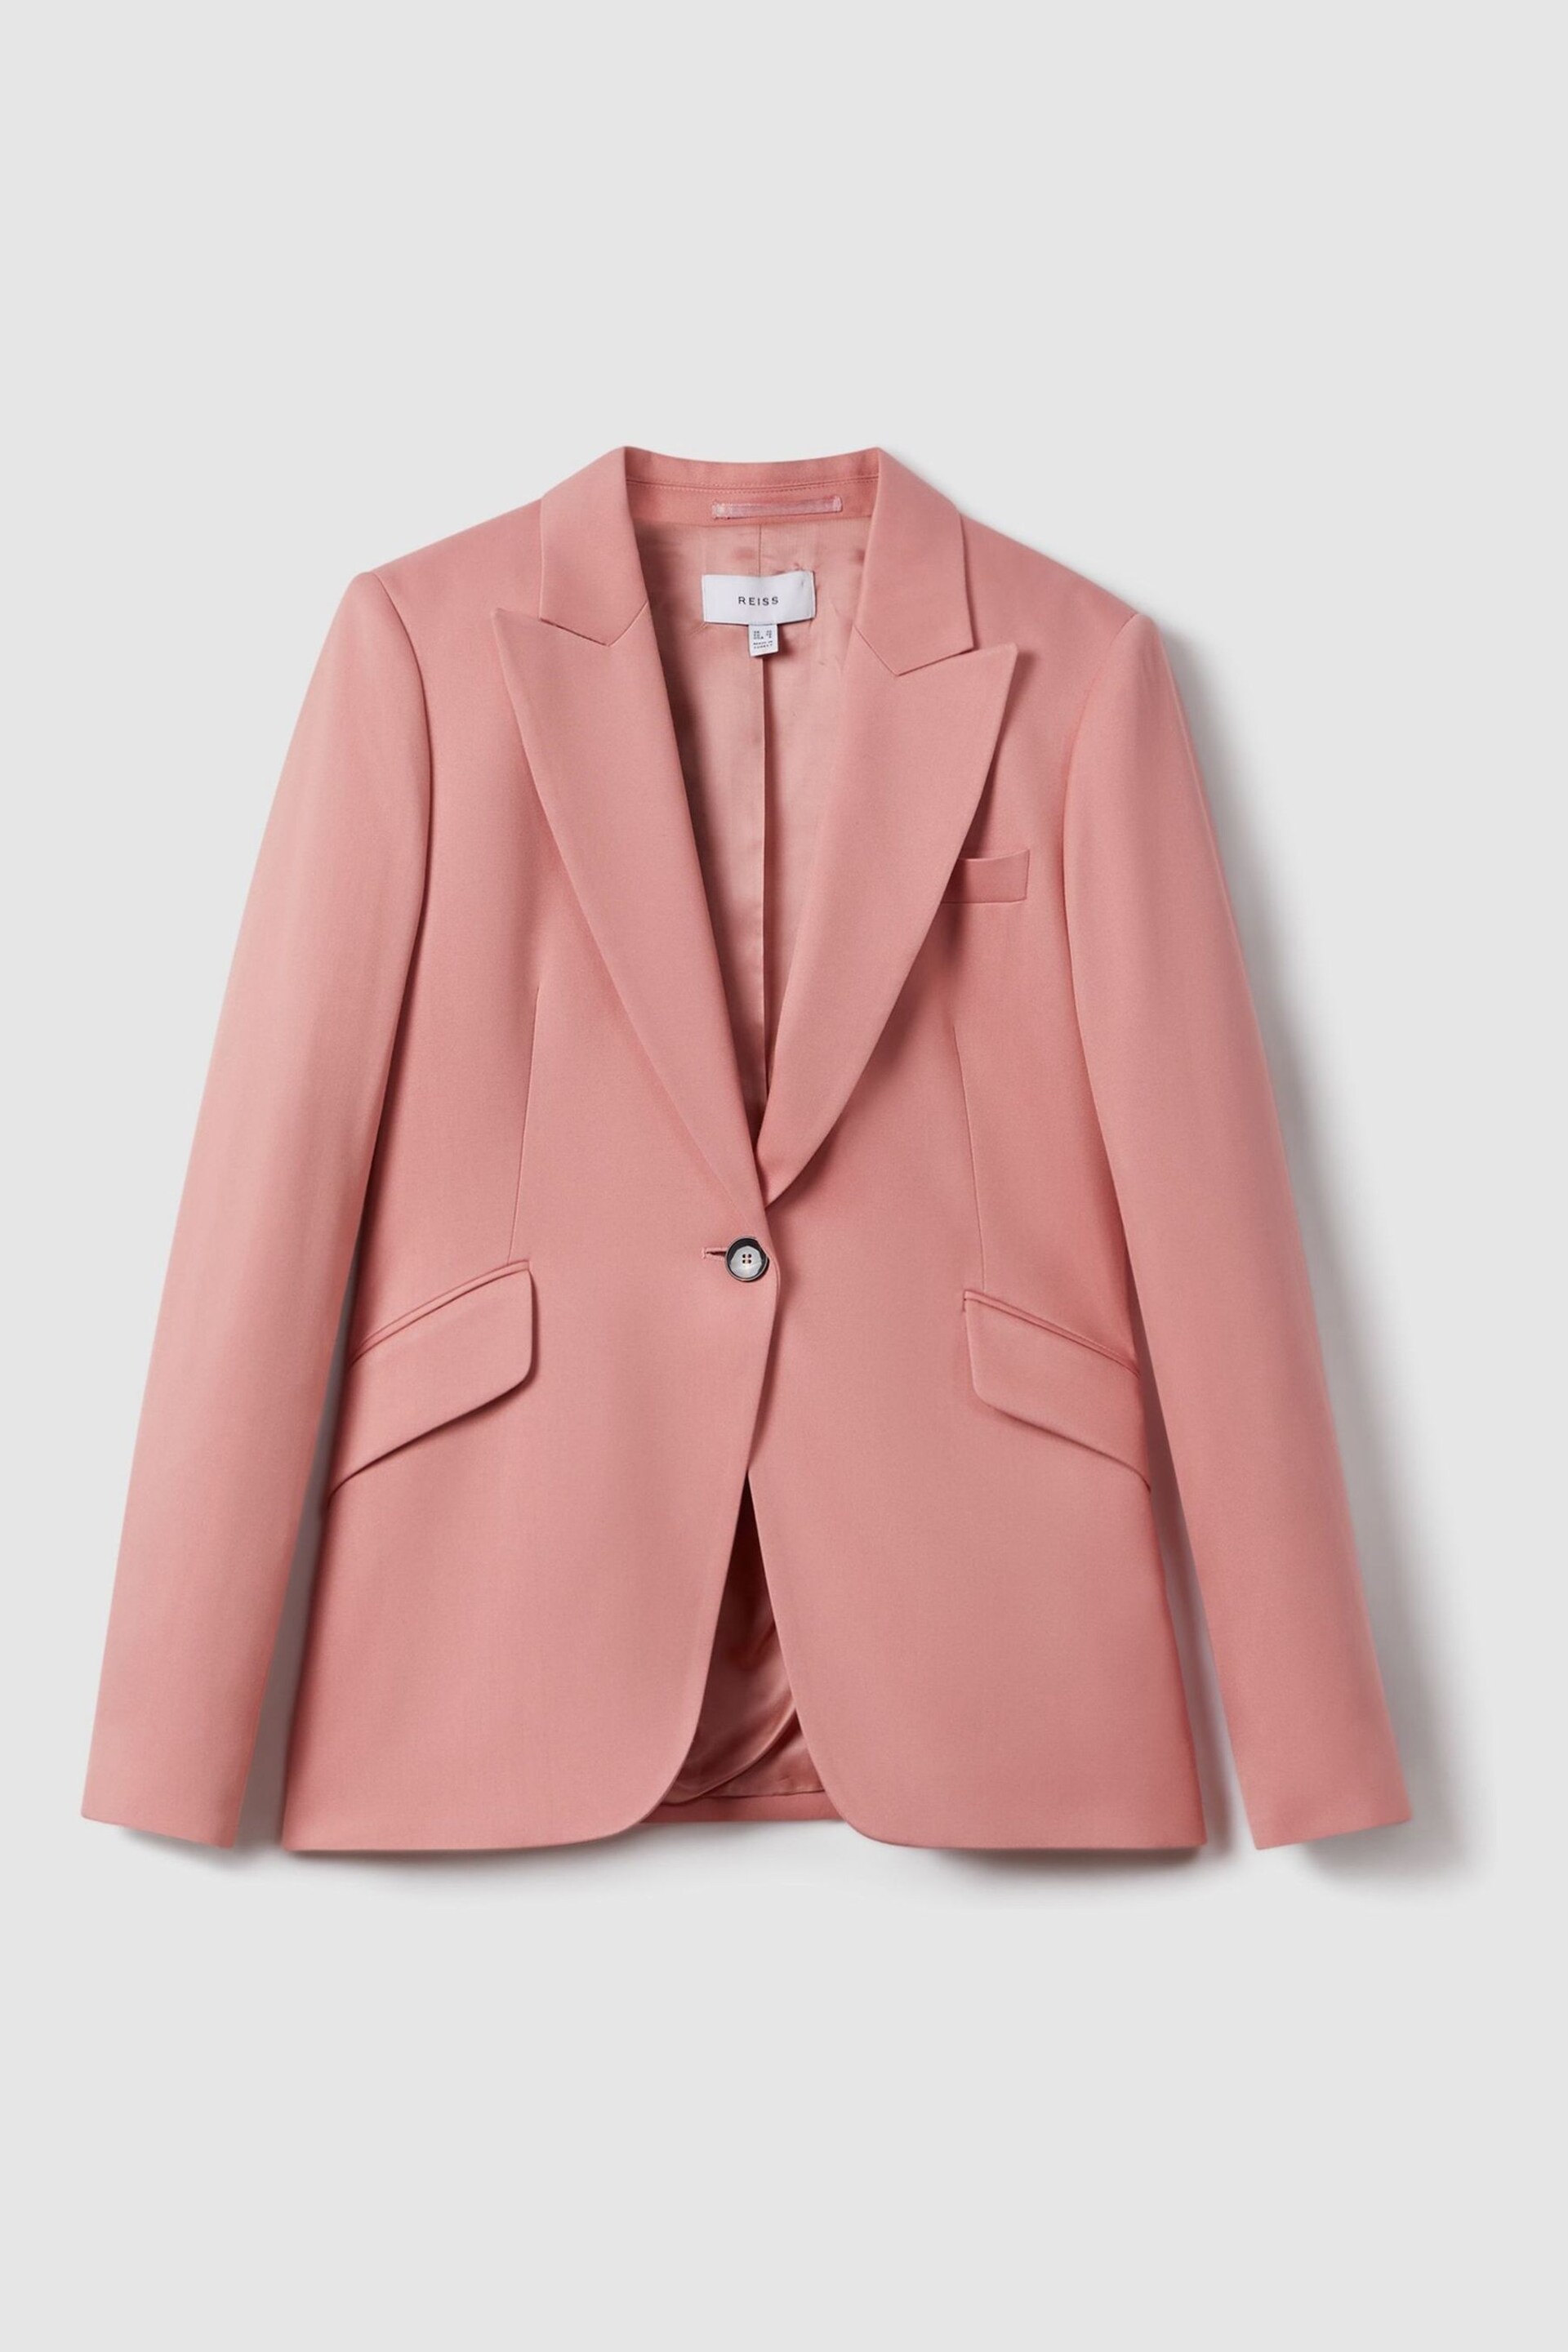 Reiss Pink Millie Petite Tailored Single Breasted Suit Blazer - Image 2 of 8